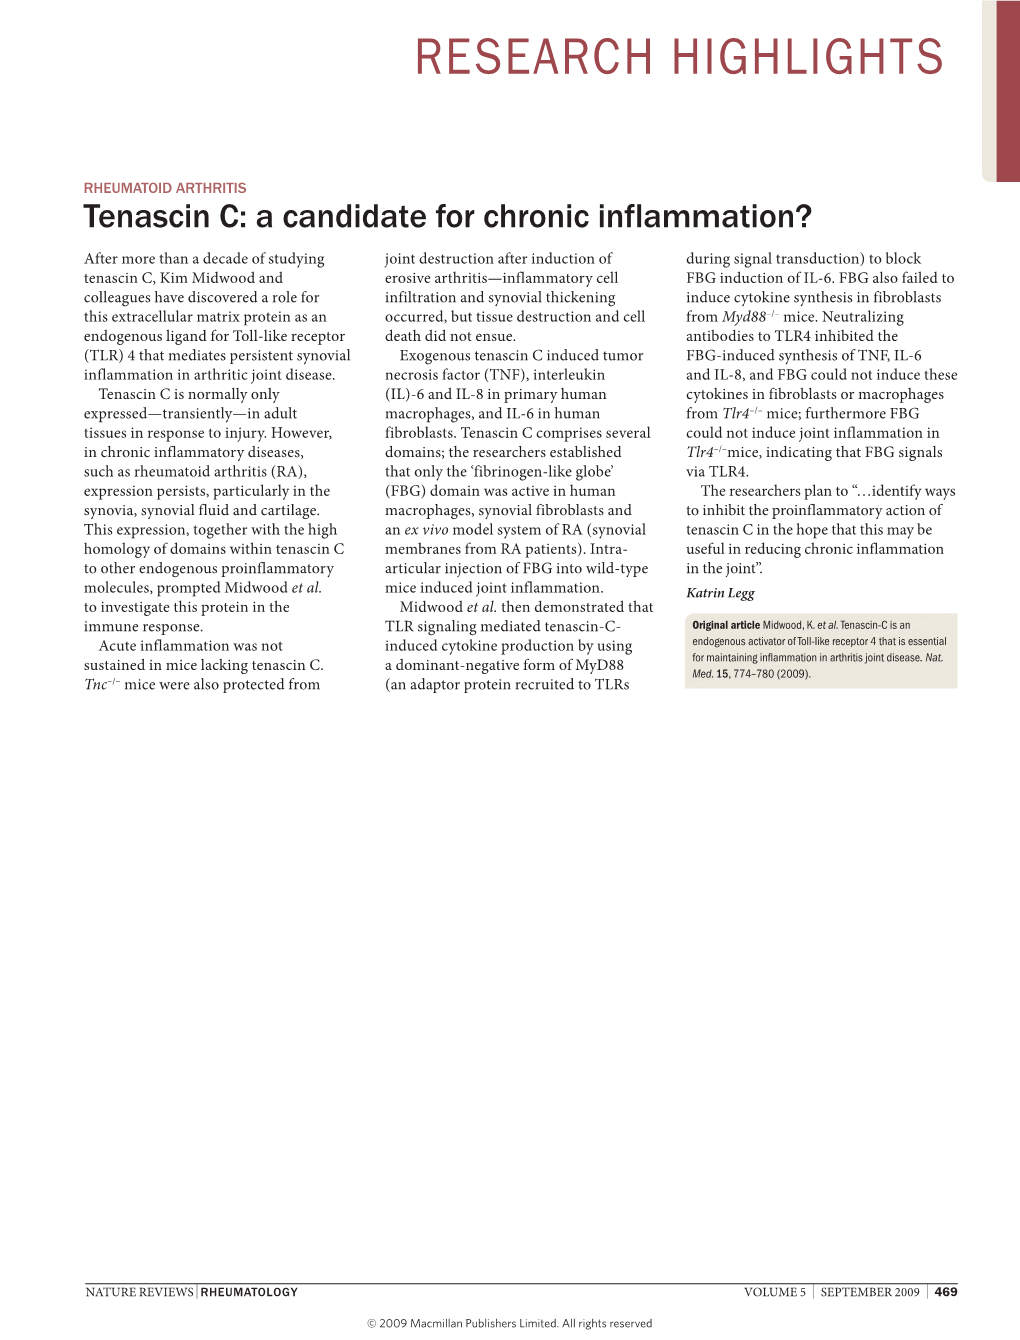 Tenascin C: a Candidate for Chronic Inflammation?